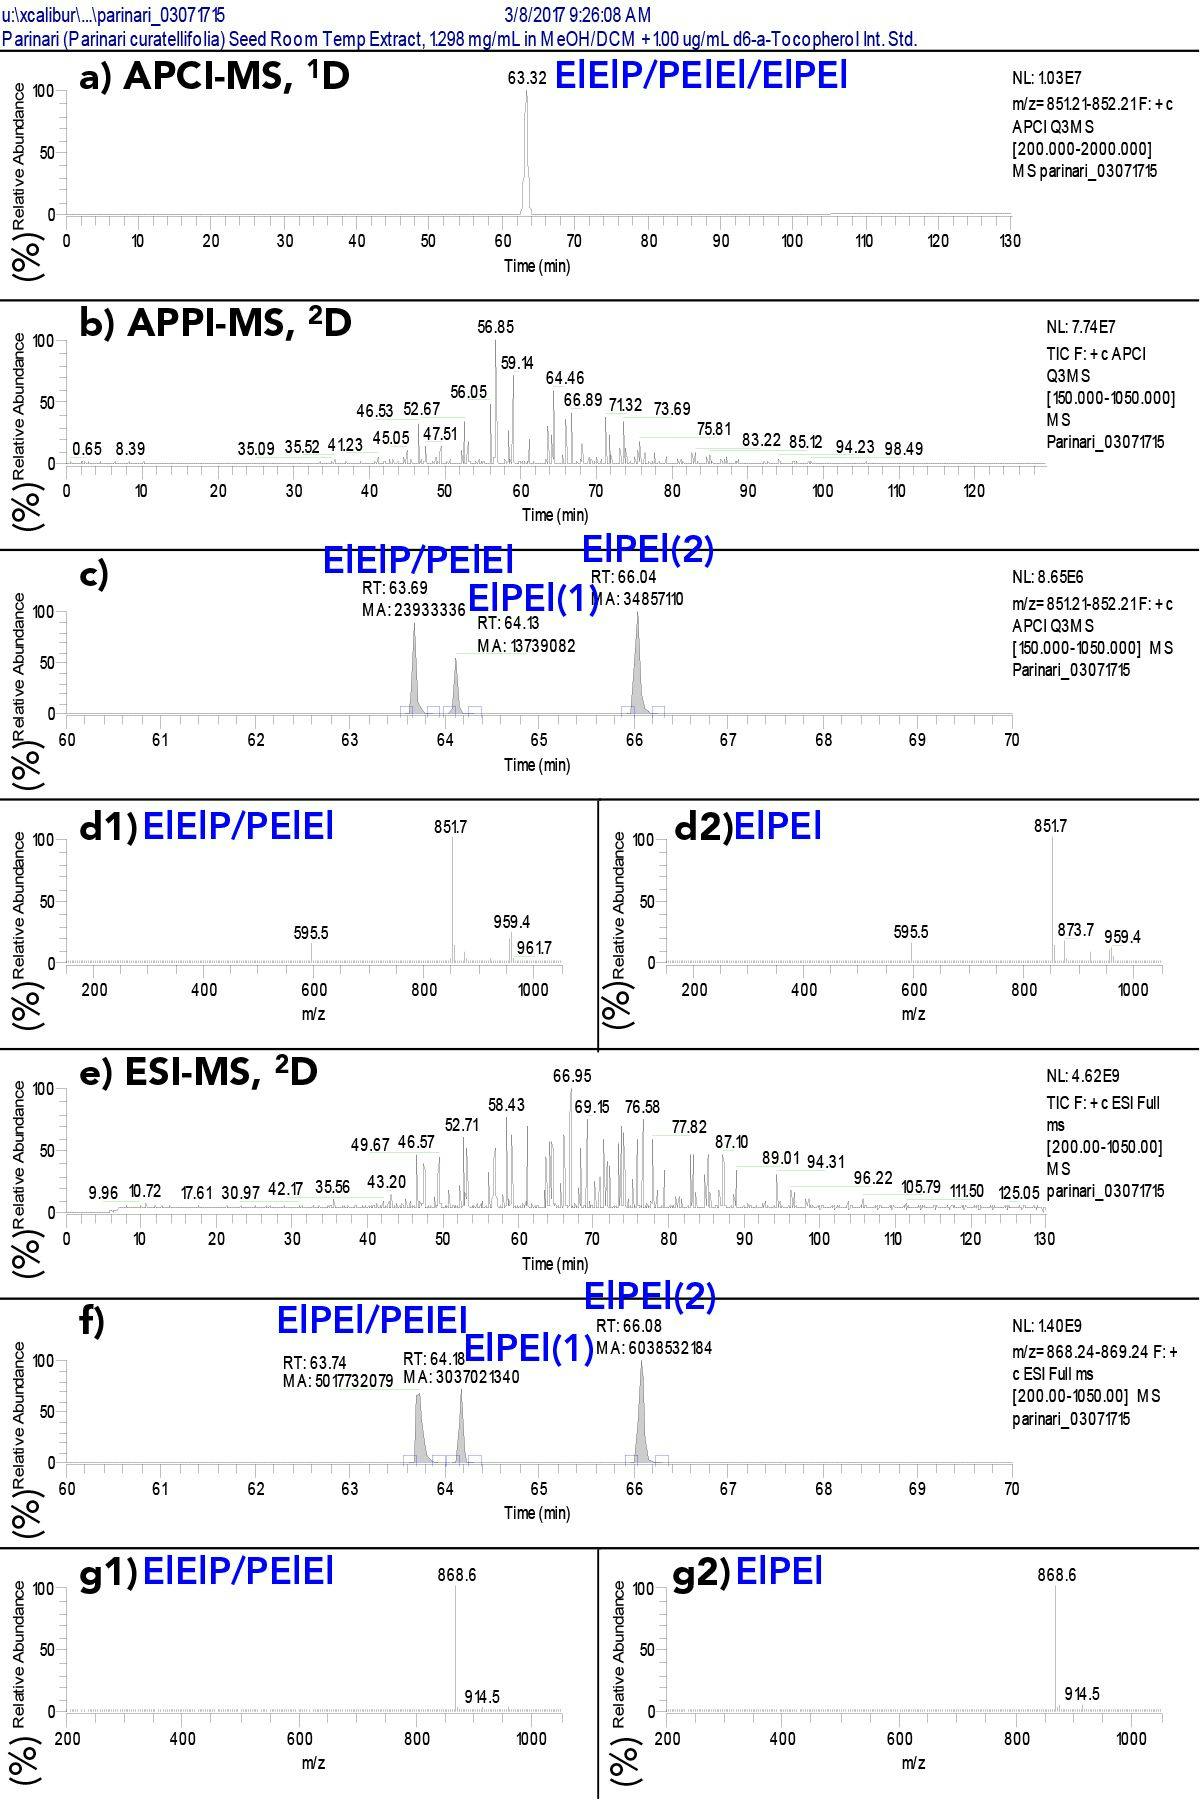 Figure S3: a) Extracted ion chromatogram (EIC) of TAG regioisomers ElElP/PElEl/ElPEl at m/z 851.7 by APCI-MS that were unresolved in the 1D; (b) the untransformed 2D chromatogram of TAGs by APPI-MS; (c) untransformed EIC of m/z 851.7, the [M+H]+ of ElElP/PElEl/ElPEl, by APPI-MS in the 2D with peaks integrated showing peak areas; (d1) APPI-MS mass spectrum across peak #1 above; (d2) APPI-MS mass spectrum across peak #3 above; (e) the untransformed 2D chromatogram of TAGs by ESI-MS; (f) untransformed EIC of m/z 868.7, the [M+NH4]+ of ElElP/PElEl/ElPEl, by ESI-MS in the 2D with peaks integrated showing peak areas; (g1) ESI-MS mass spectrum across peak #1 above; (g2) ESI-MS mass spectrum across peak #3 above. For fatty acyl chain abbreviations see Figure 4.